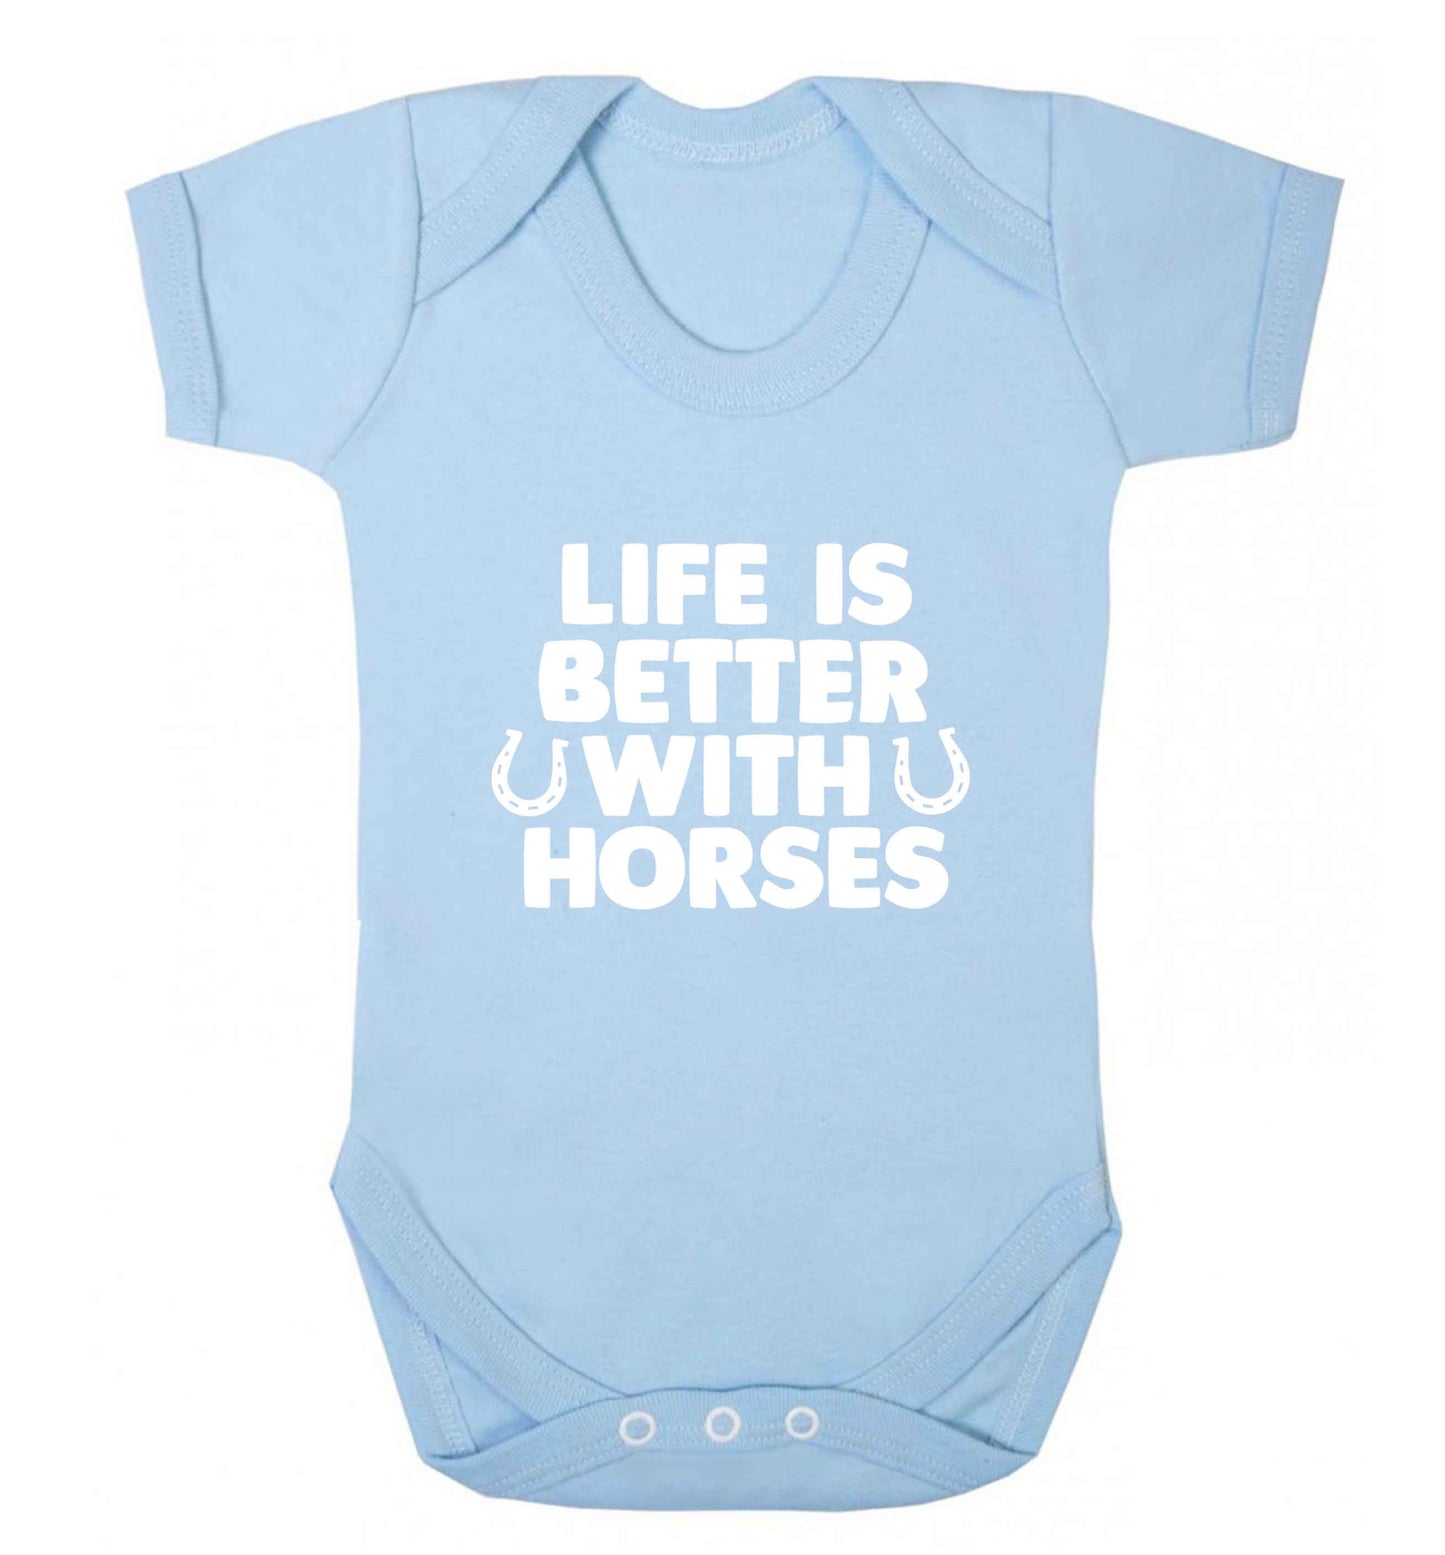 Life is better with horses baby vest pale blue 18-24 months